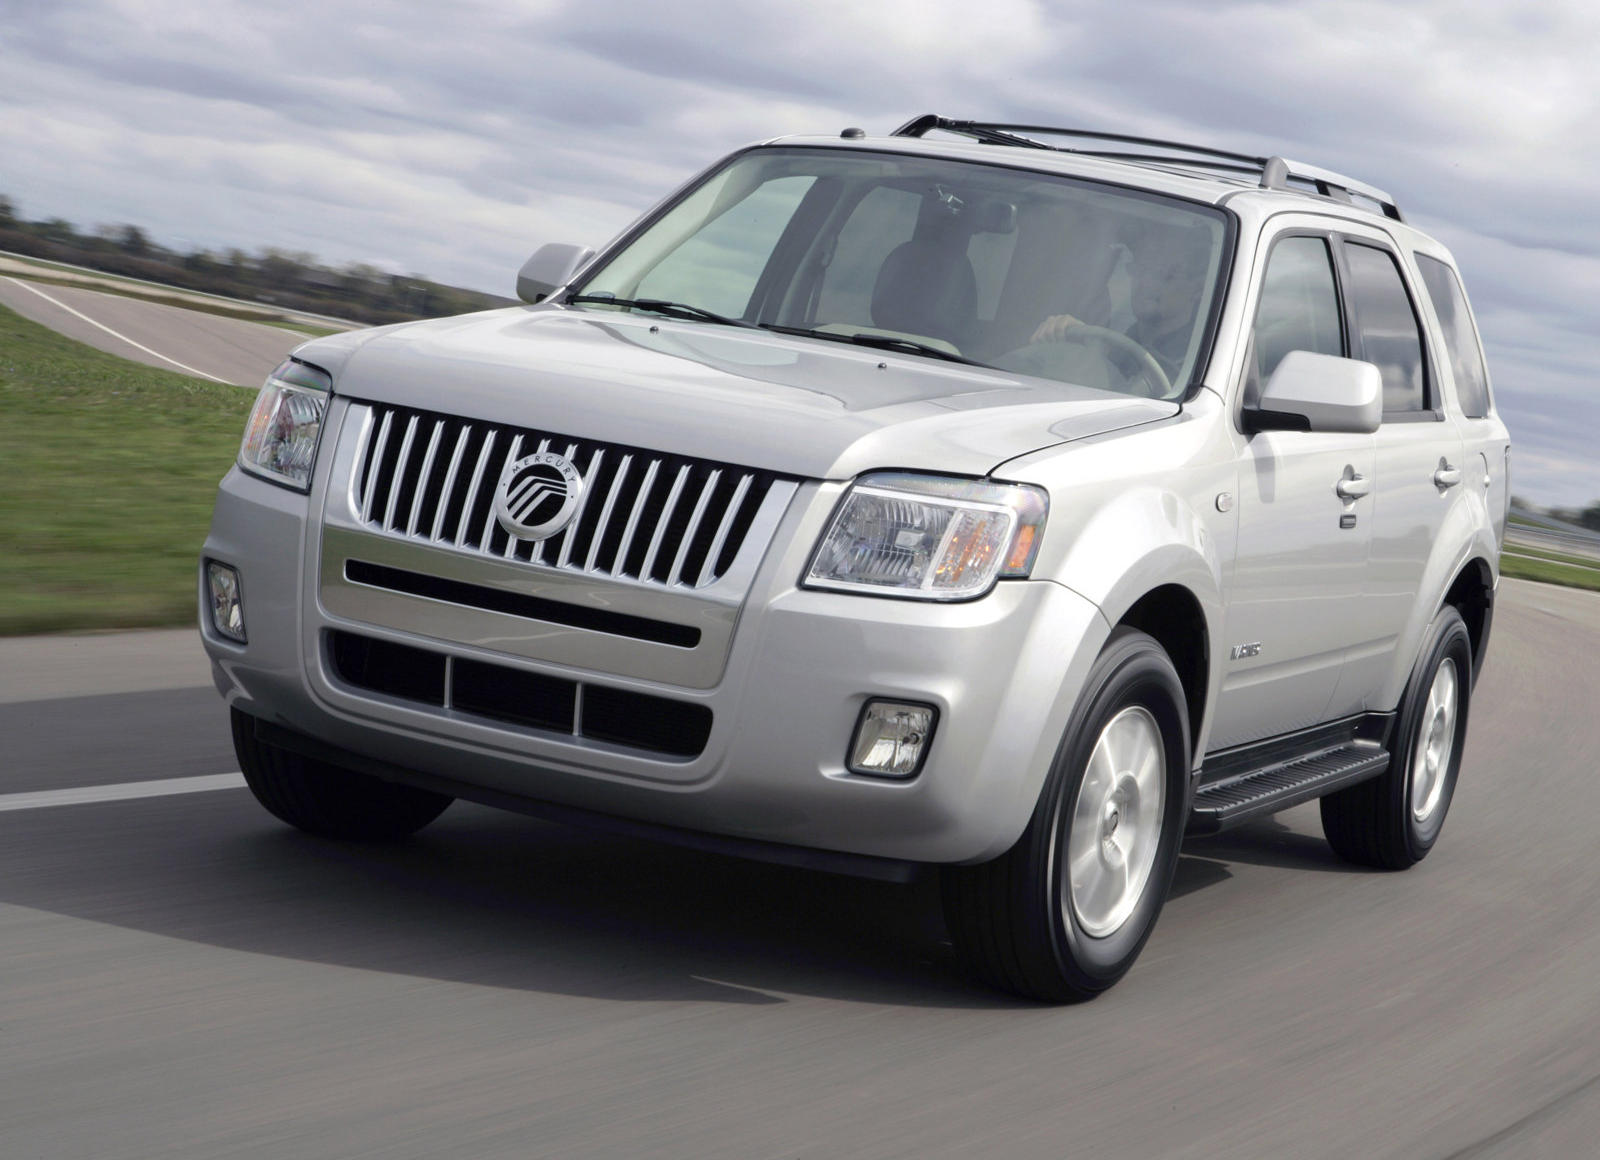 2011 Mercury Mariner Front View Driving